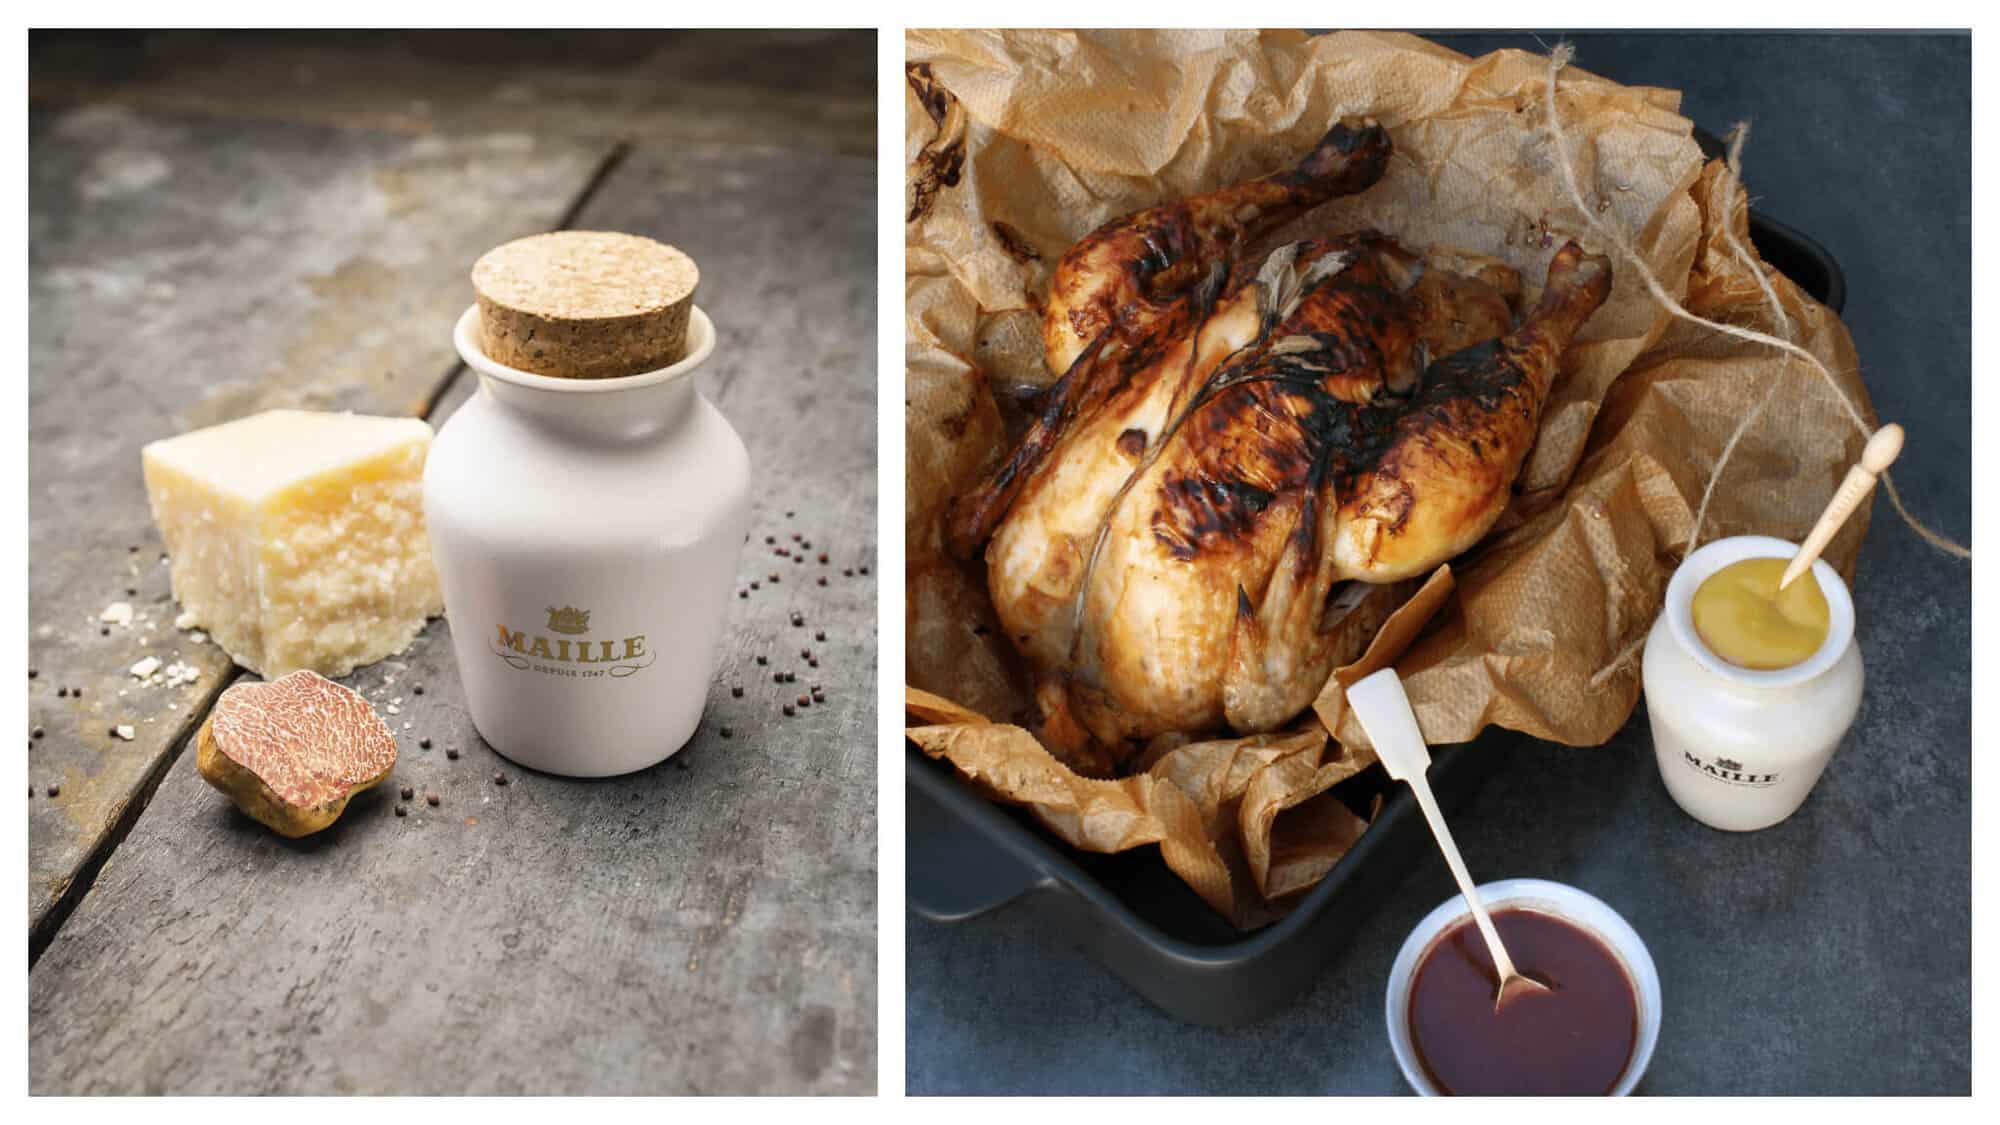 Left: a white ceramic jar of Mailel mustard on a wooden table with a block of parmesan next to it. Right: a roast chicken in a roasting tin with a ceramic jar of mustard to the right and a dark brown colored sauce in a white bowl next to it.